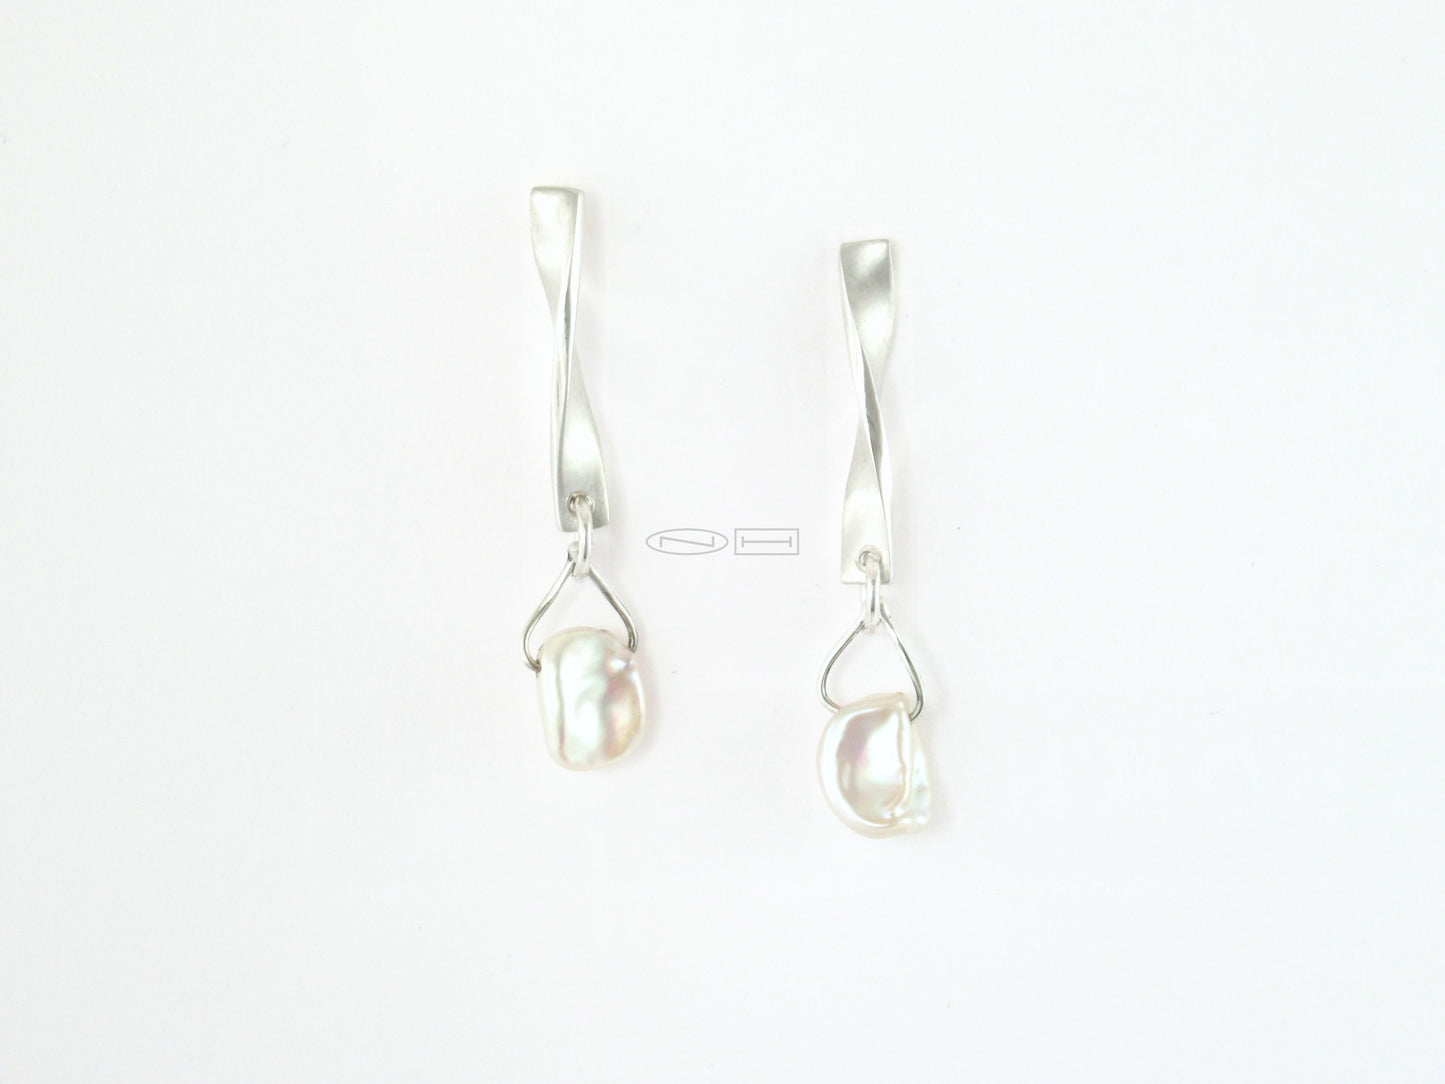 ZEALmetal designs, Canadian made in Kingston ON Iceberg twist ~ Sterling silver twist earrings with matte and high polish finish, unique keshi pearl drops that to me look like little icebergs...   Pearl powder can zen you out. Known as a powerful Shen (spirit) stabilizer, it supports mood stability with its soothing and calming nature. Its spirit-building capabilities can help to relieve the uneasiness, nervousness, anxiety and tension associated with occasional stress, leaving you cool, calm and collected.